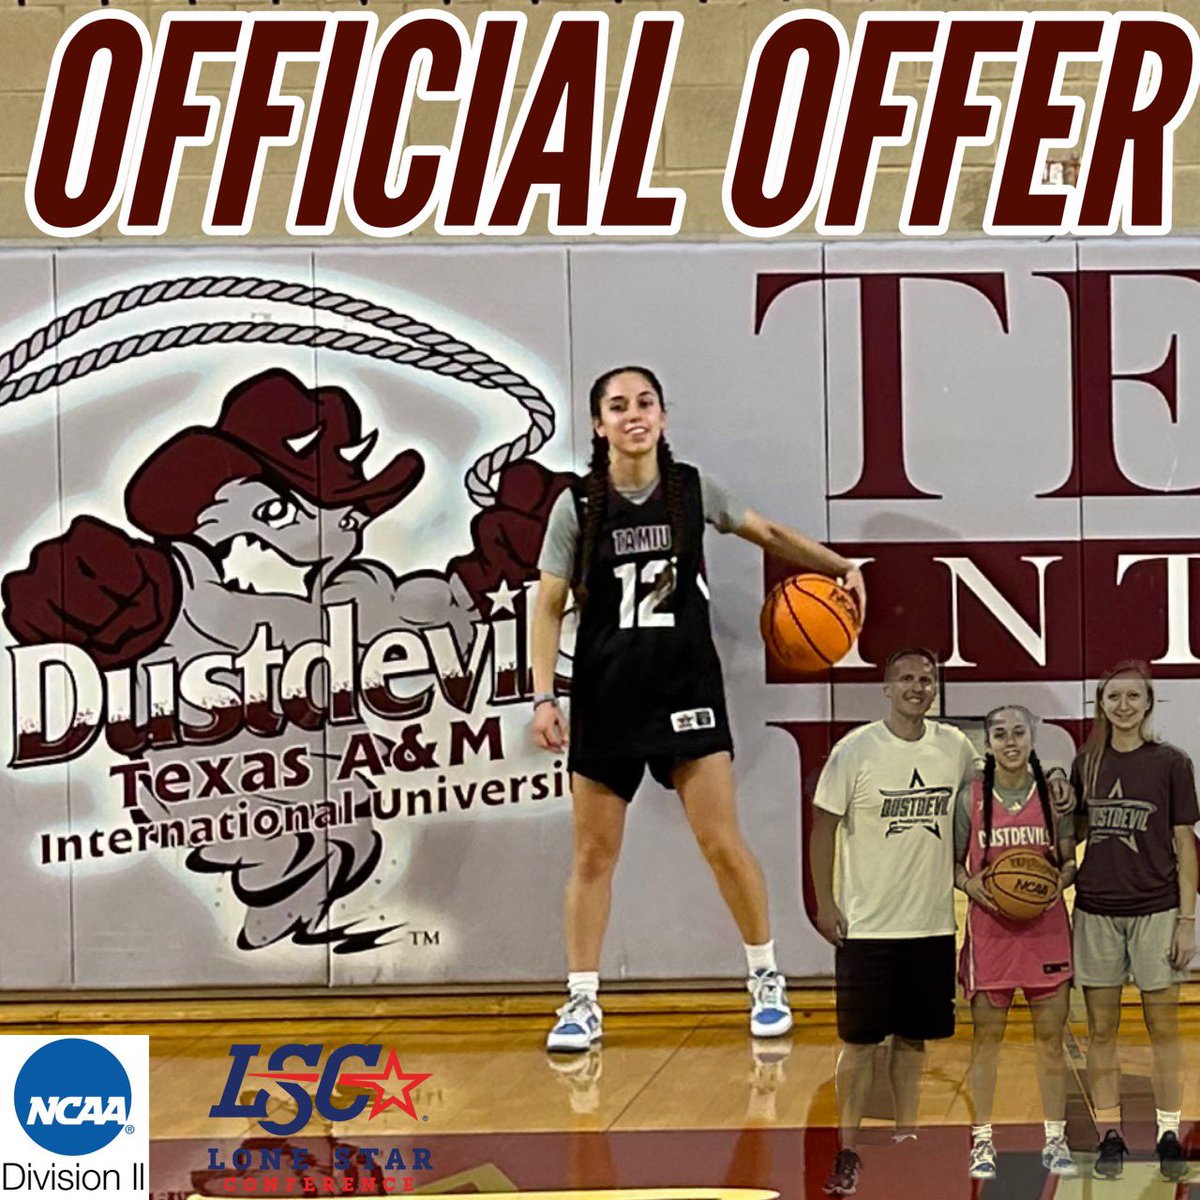 After a great visit with @CoachNateVogel I am very blessed to receive an offer from @DustdevilsWBB. Awesome campus and facilities.

#dustem

@DustdevilsWBB
@AIRtime_elite
@coachchris_air
@CoachNateVogel
@MikeTrainInsane 
@Fchavezeptimes 
@LadyCougarsGBB